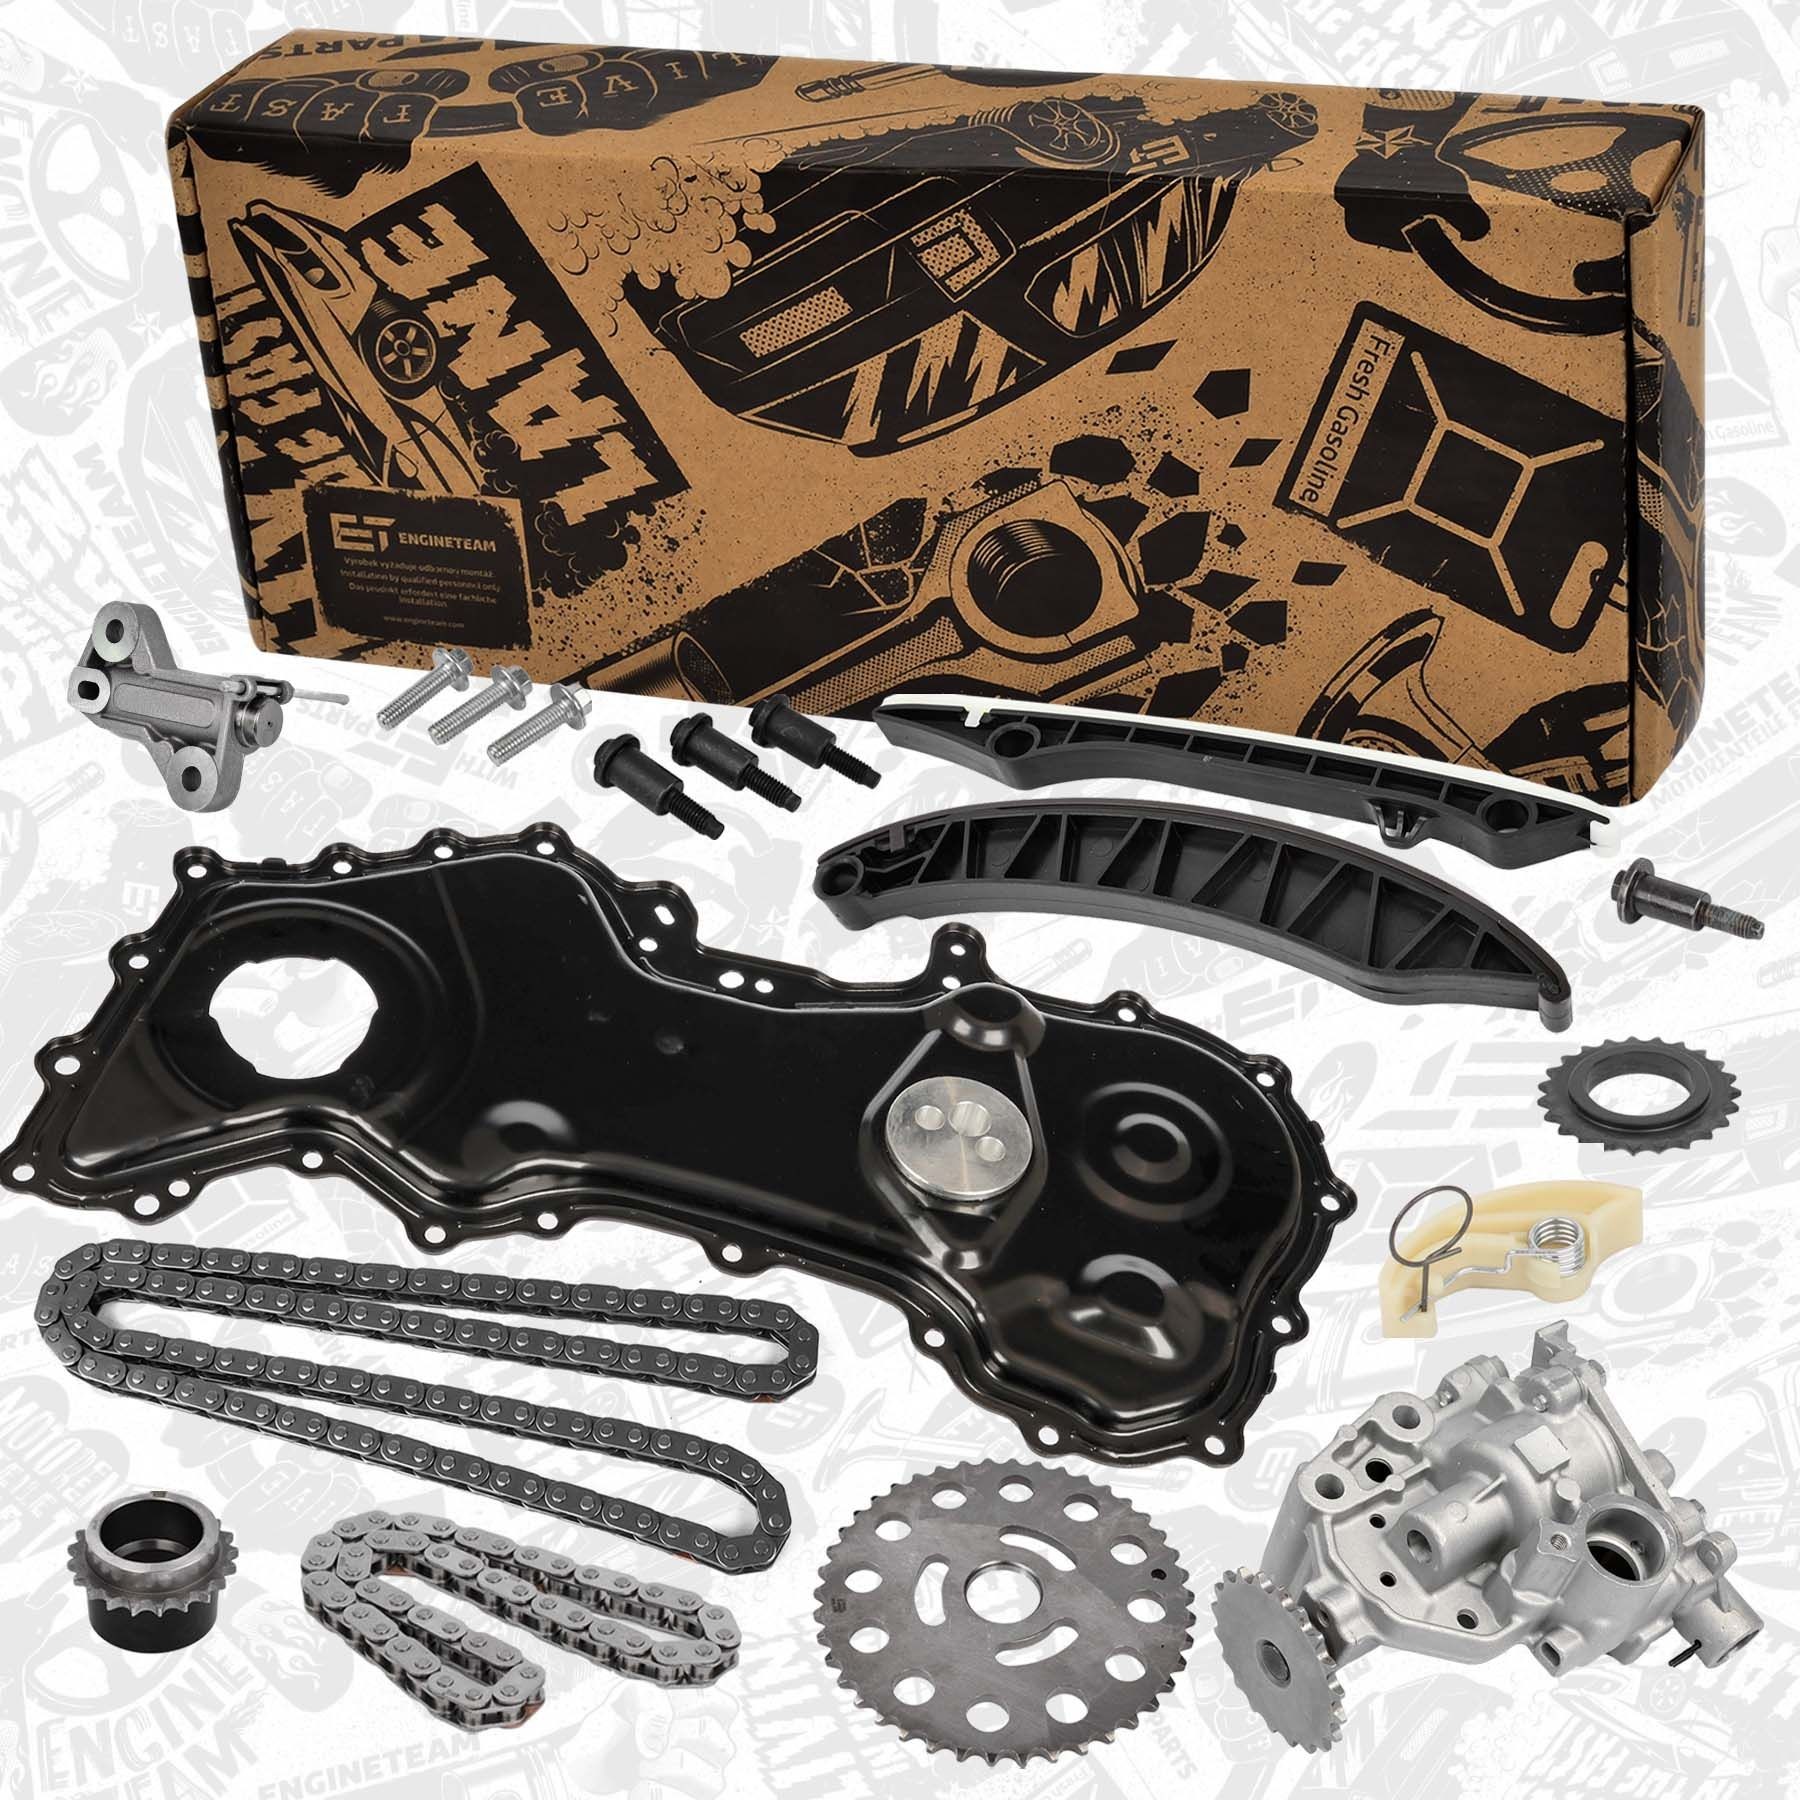 ET ENGINETEAM RS0073VR3 Timing chain kit 150A 067 27R